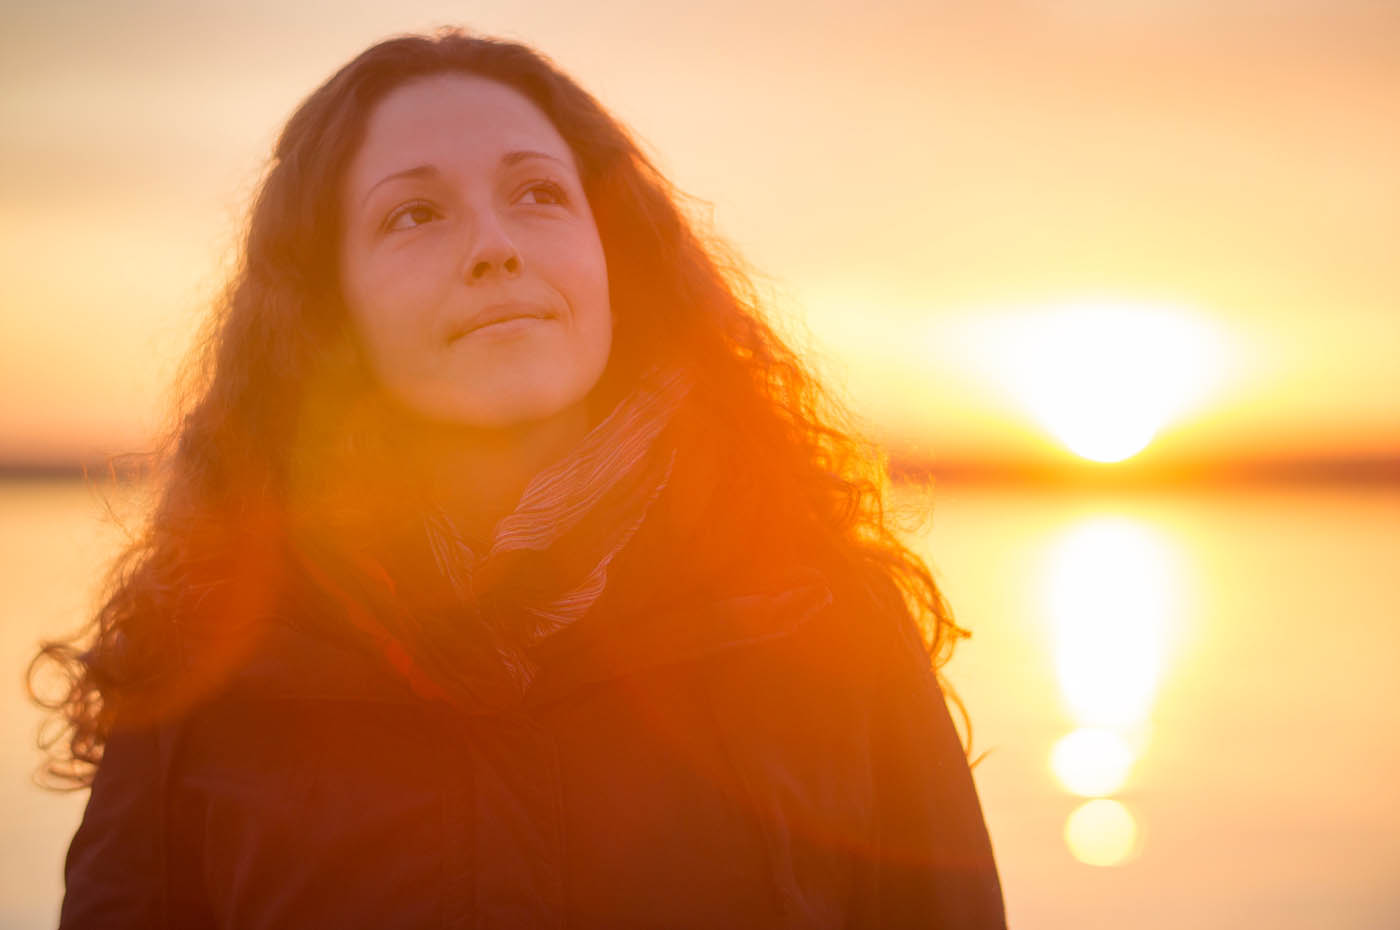 A women standing in front of a red light sunset, learn the benefits of light therapy near you.